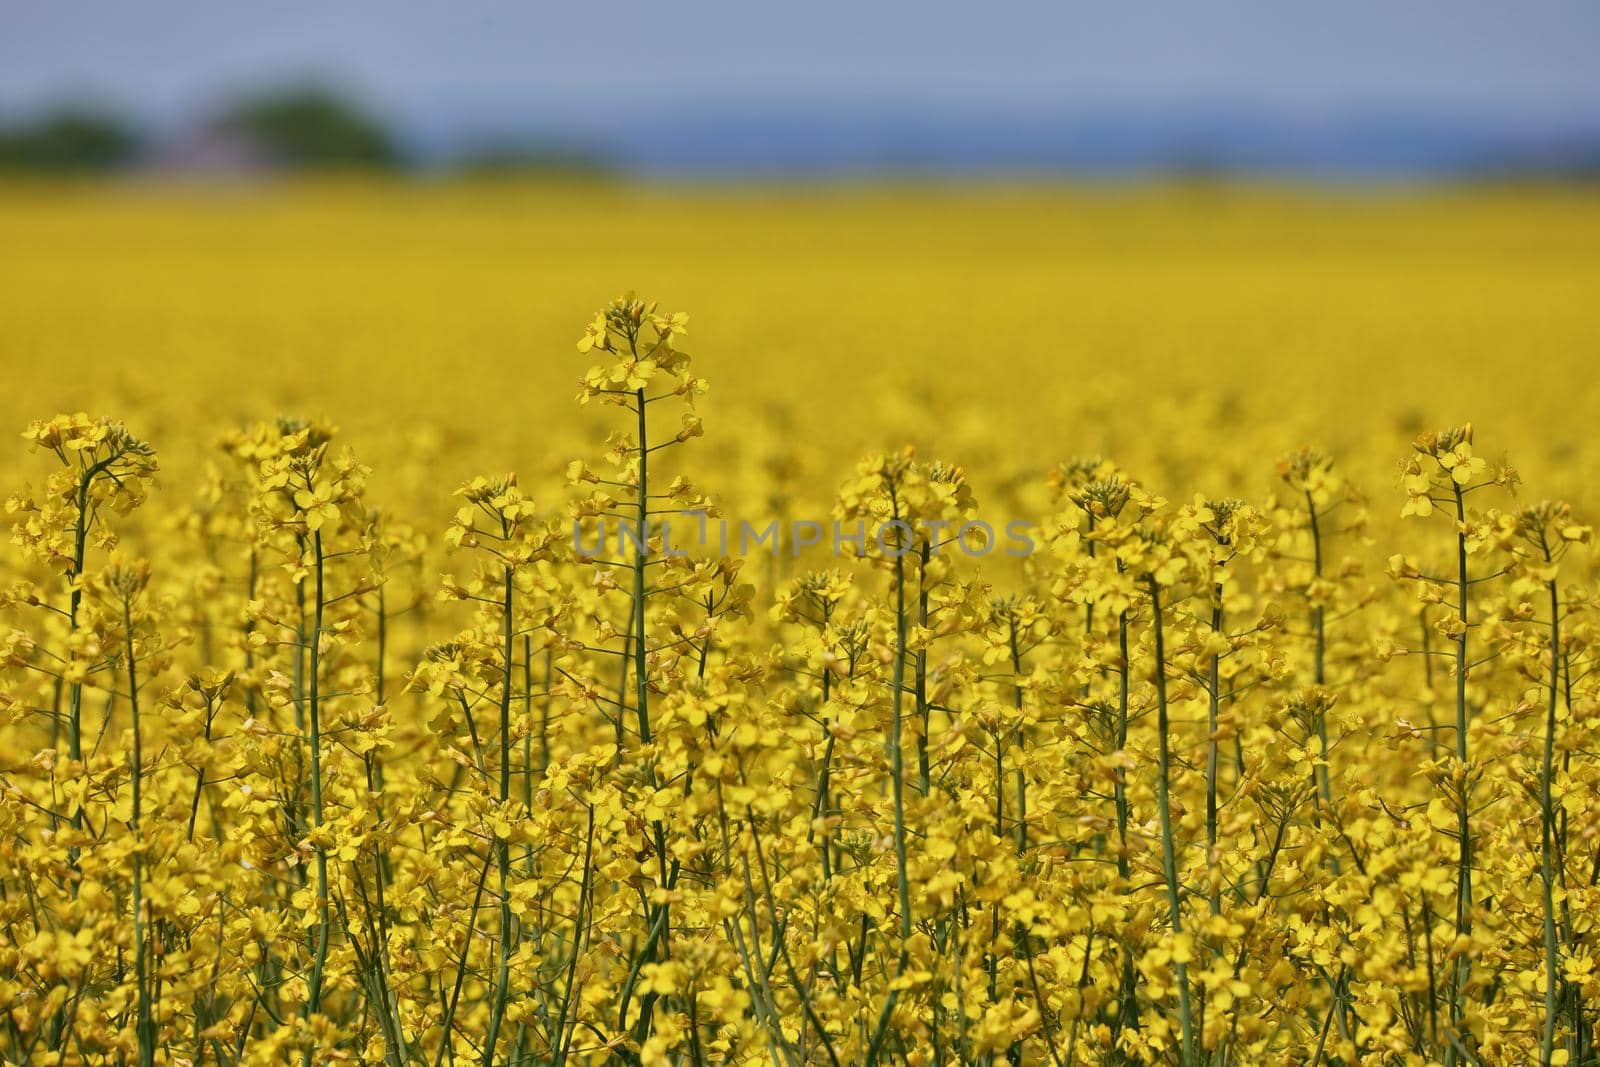 Close up of Yellow Canola Flowers in a Farm Field Against a Sunny Blue Sky by markvandam